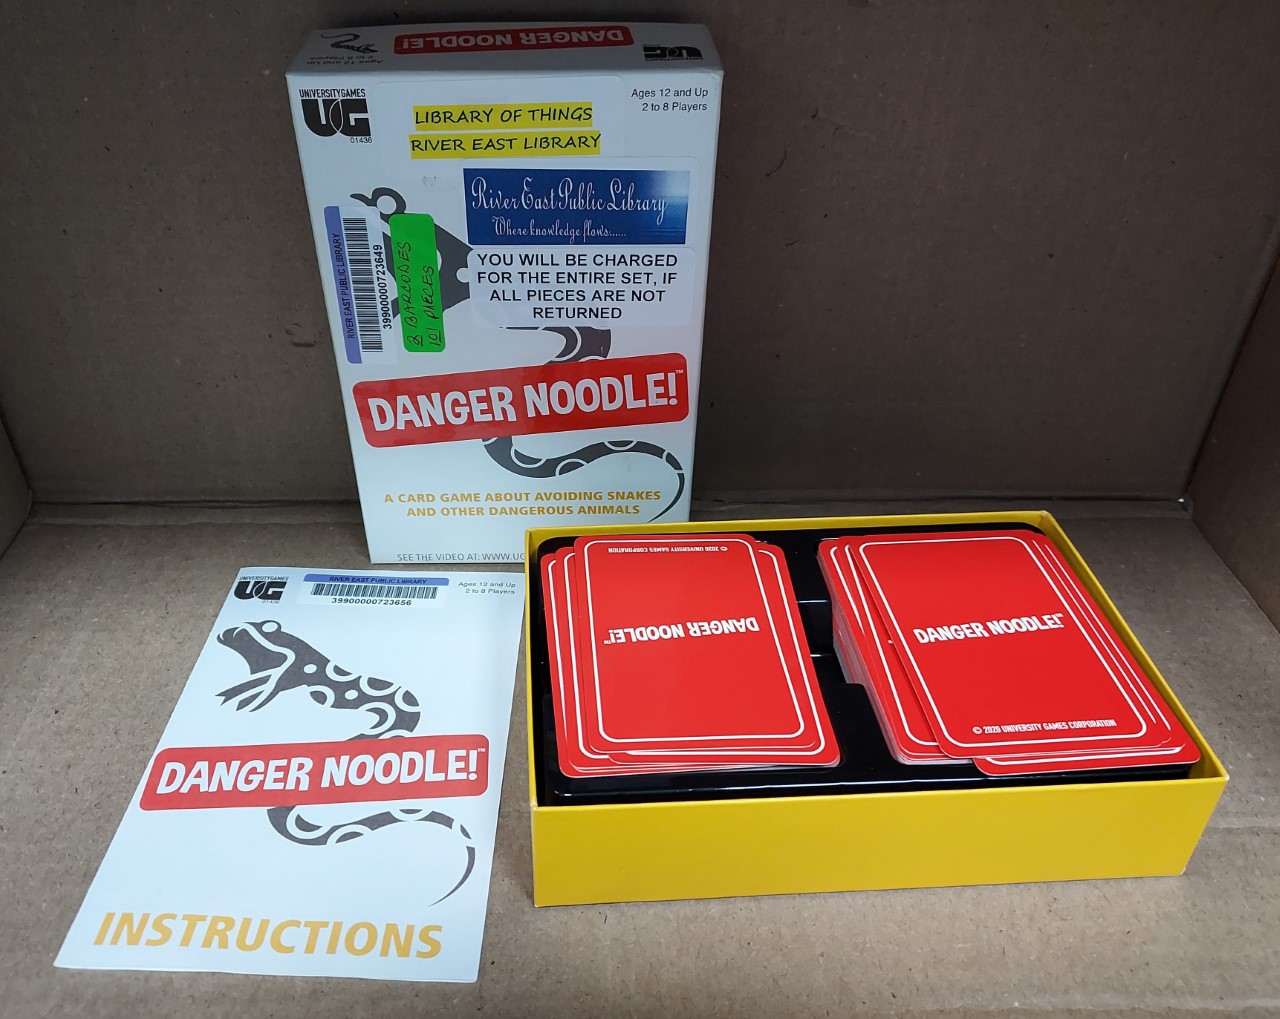 Image of a game called Danger Noodle